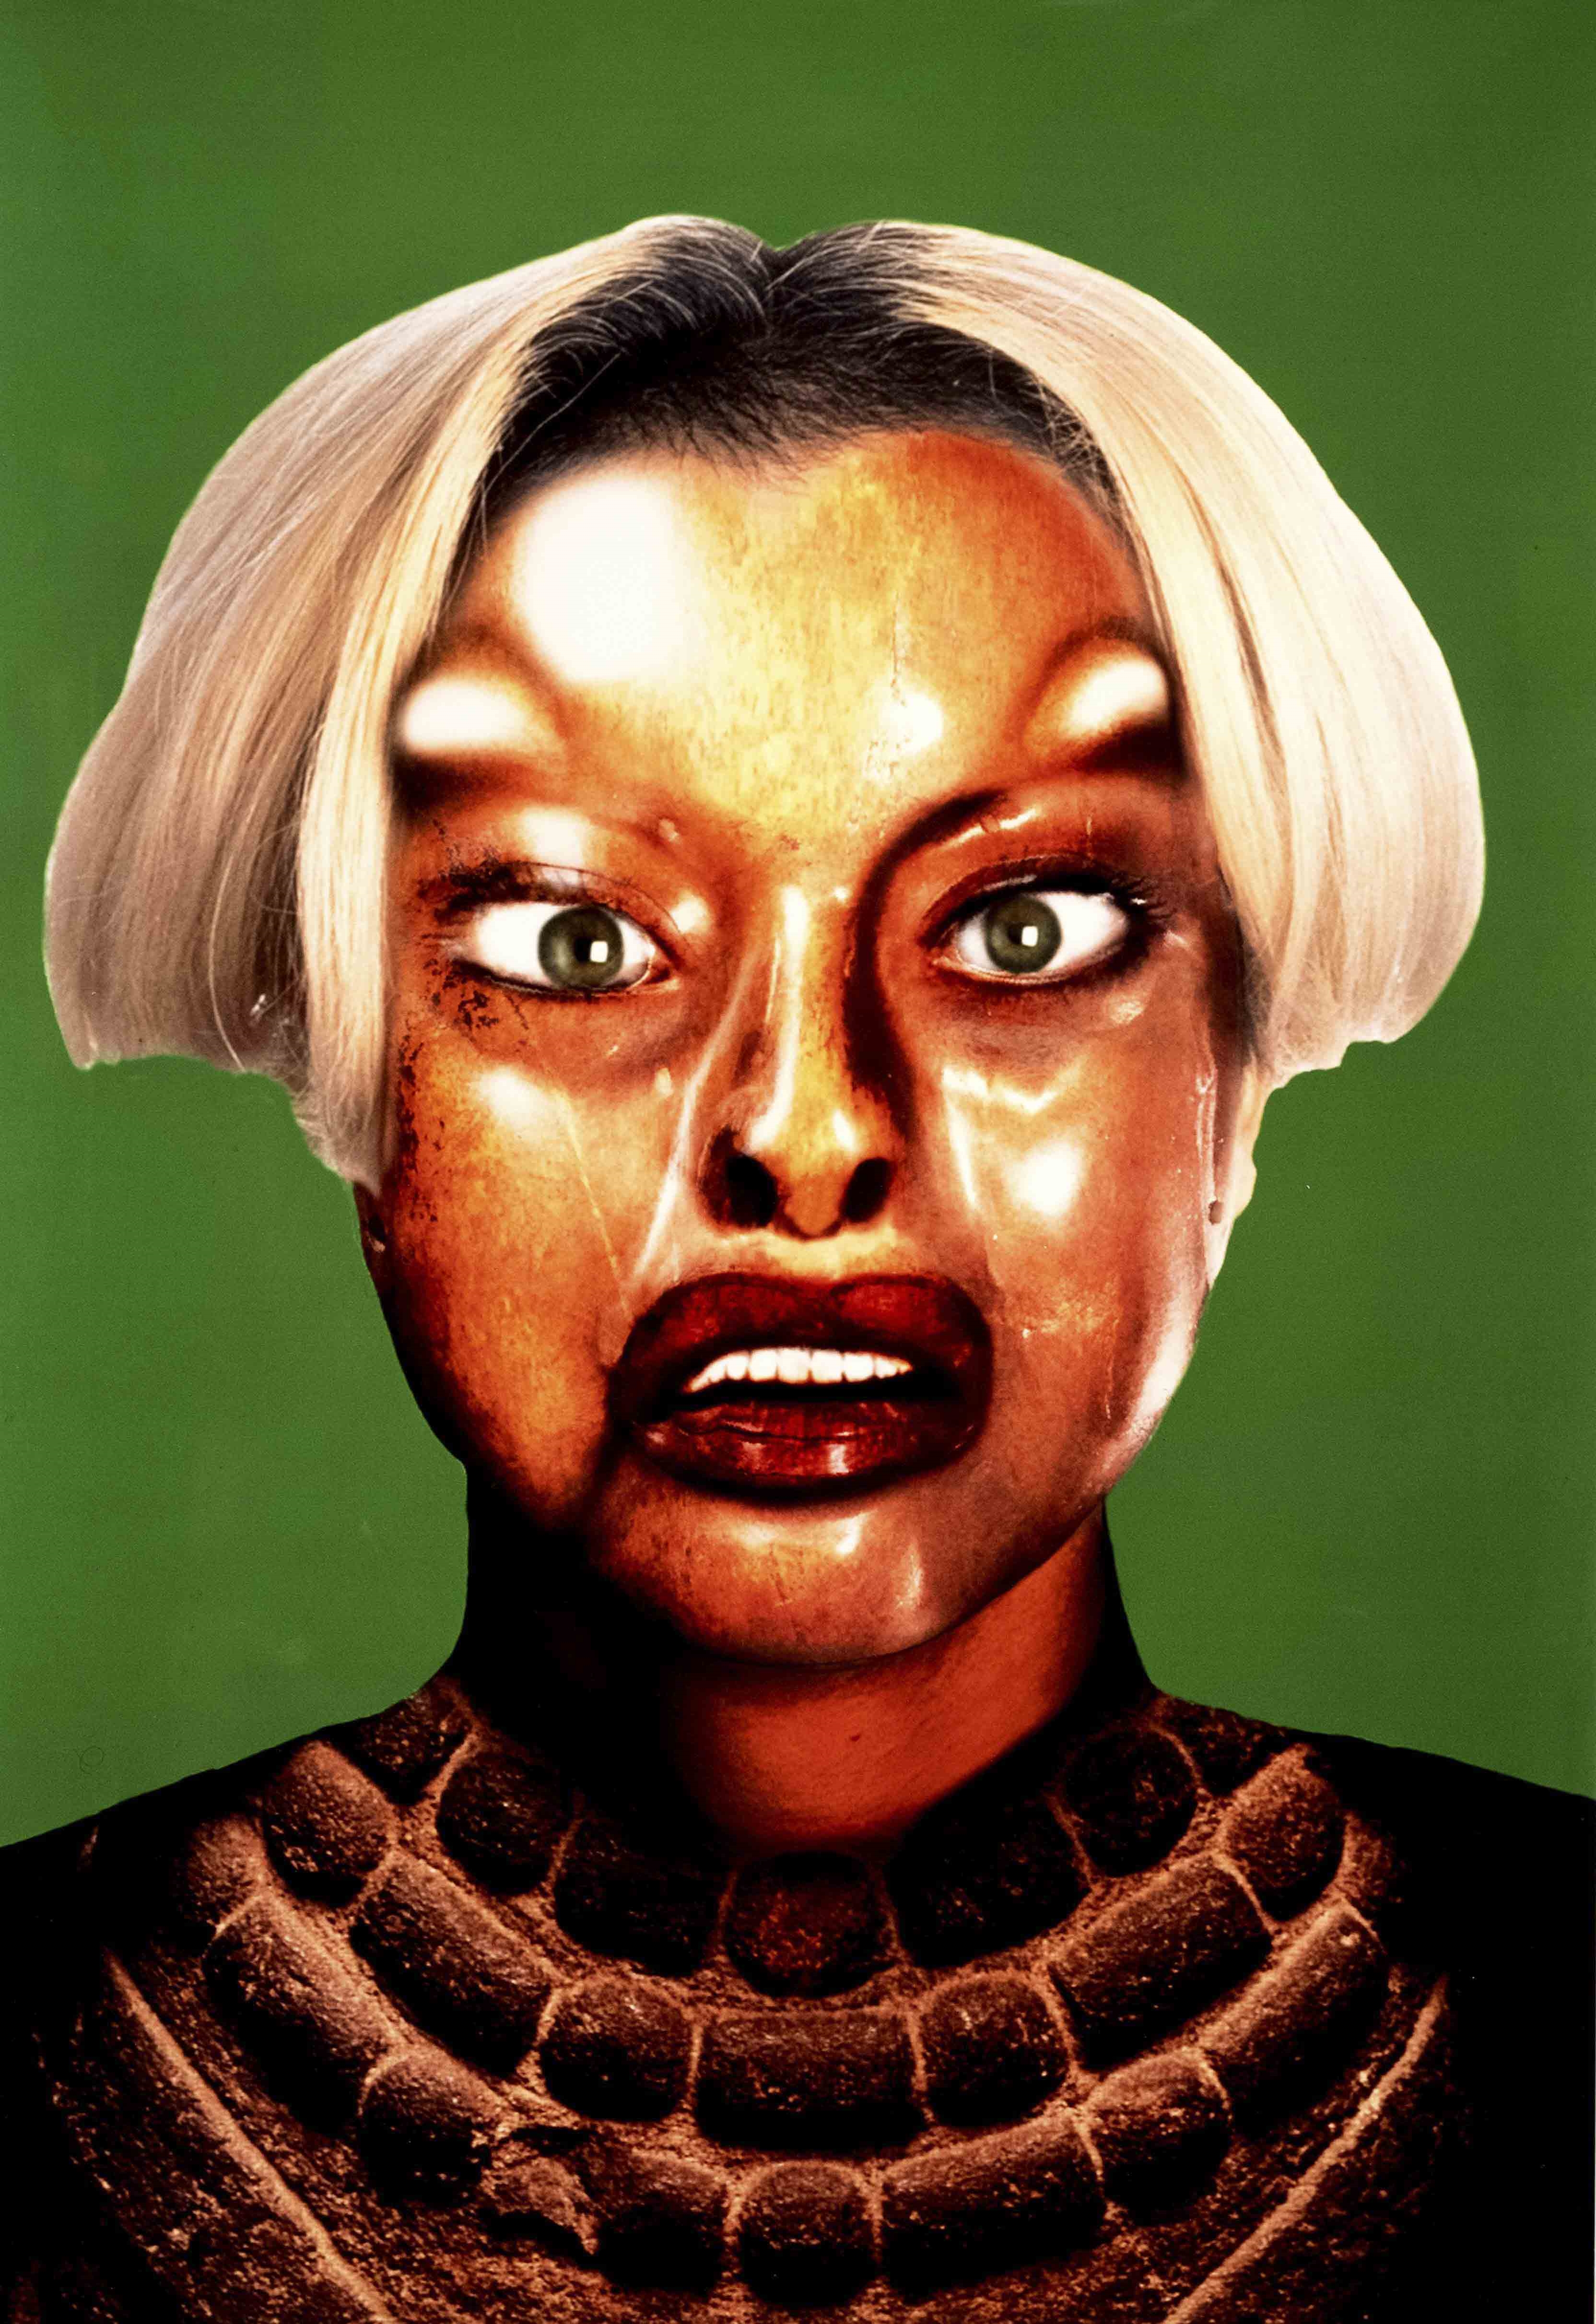 Artwork by Orlan, contemporary French artist, Made of prints